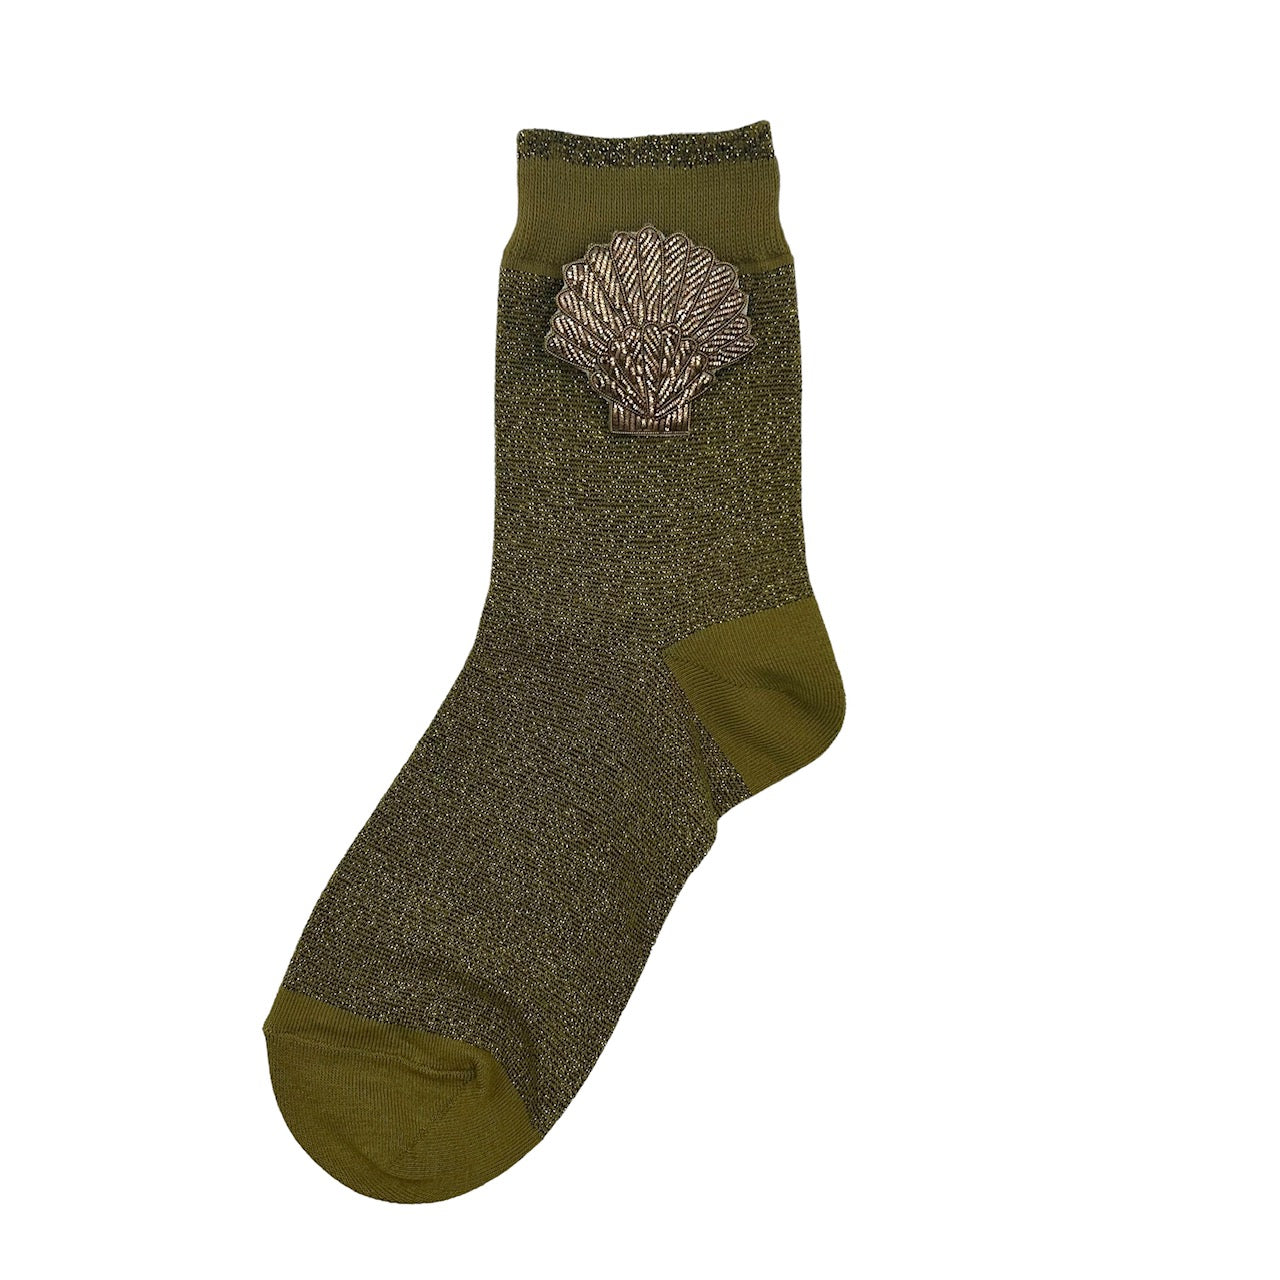 Tokyo socks in olive with a shell brooch